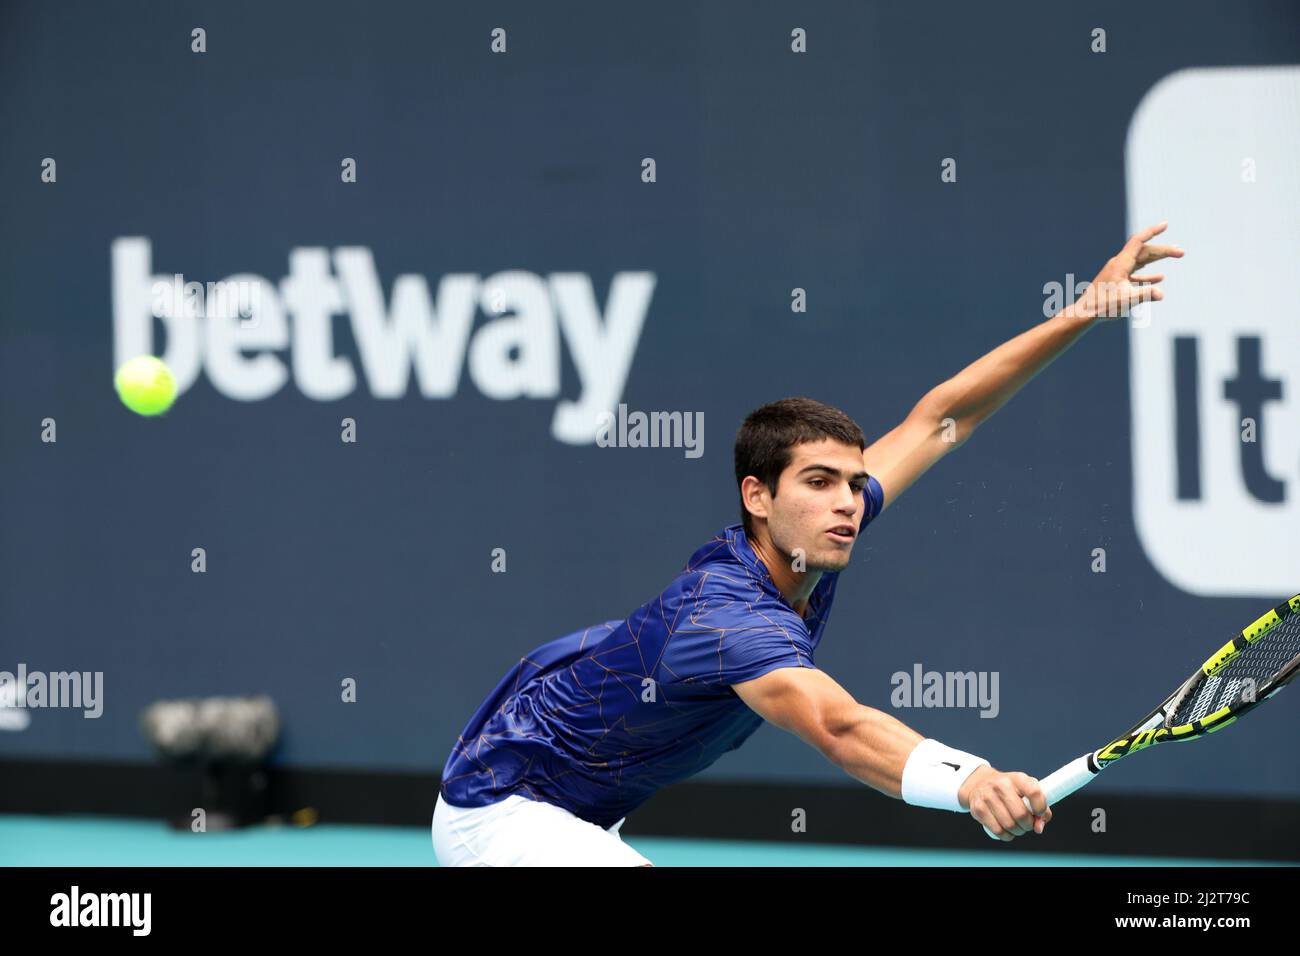 Miami Gardens, Florida, USA. Miami Gardens, Florida, USA. 03rd Apr, 2022. Carlos Alcaraz of Spain makes history as the first spaniard and youngest player to win the Miami Open. The 18-year-old claimed his first ATP Masters 1000 title with a straight-set victory over Casper Ruud of Norway in the men's final of the Miami Open at the Hard Rock Stadium on April 03, 2022 in Miami Gardens, Florida. People: Carlos Alcaraz Garfia Credit: Hoo Me/Media Punch/Alamy Live News Credit: MediaPunch Inc/Alamy Live News Stock Photo